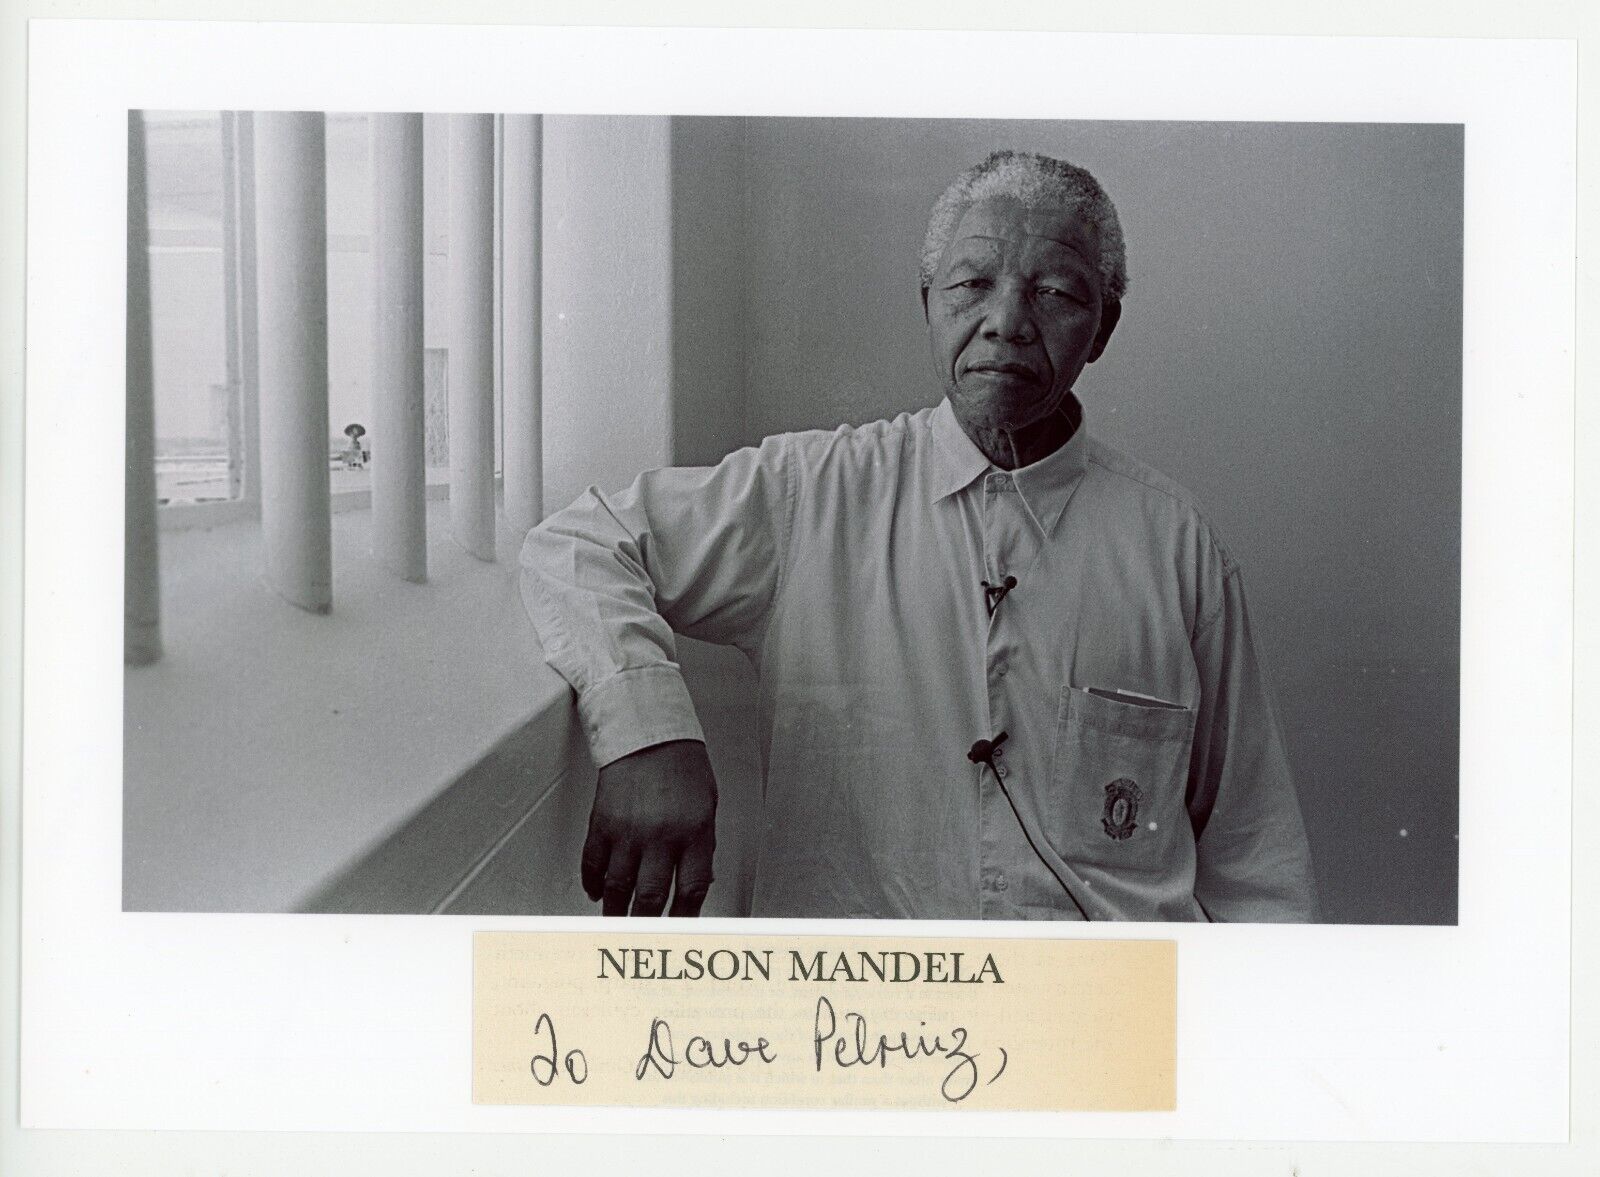 Nelson Mandela ~ Handwritten Words w/ Photo Display (not signed or autographed)